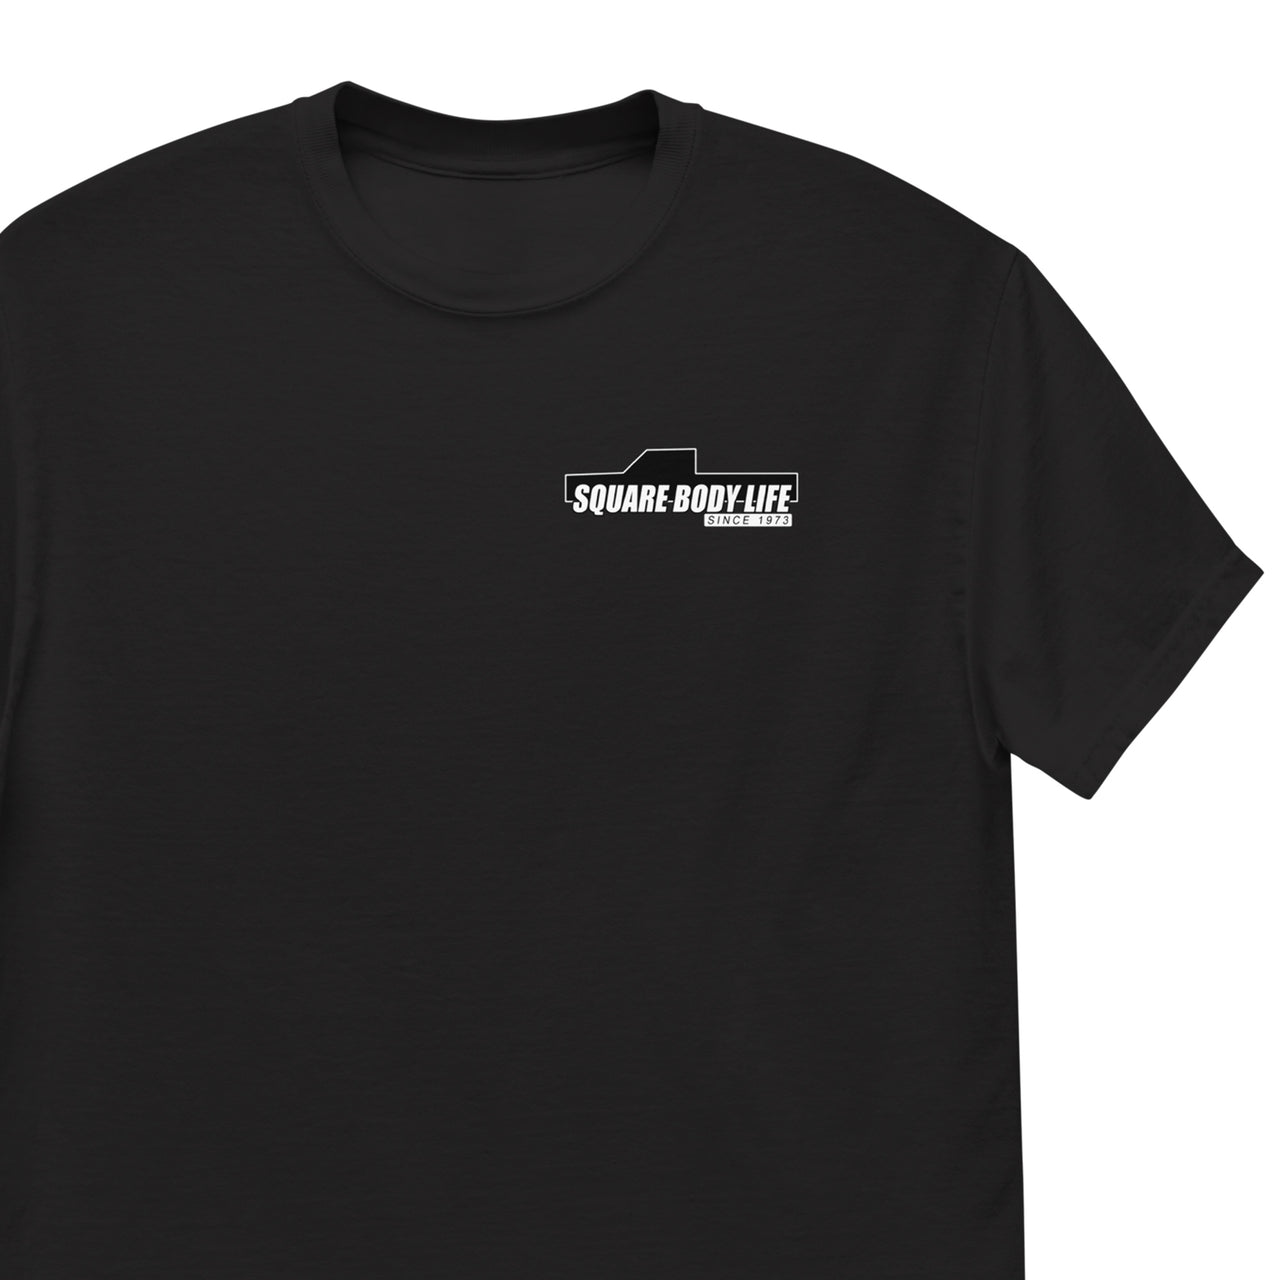 Square Body Life T-Shirt in black front view